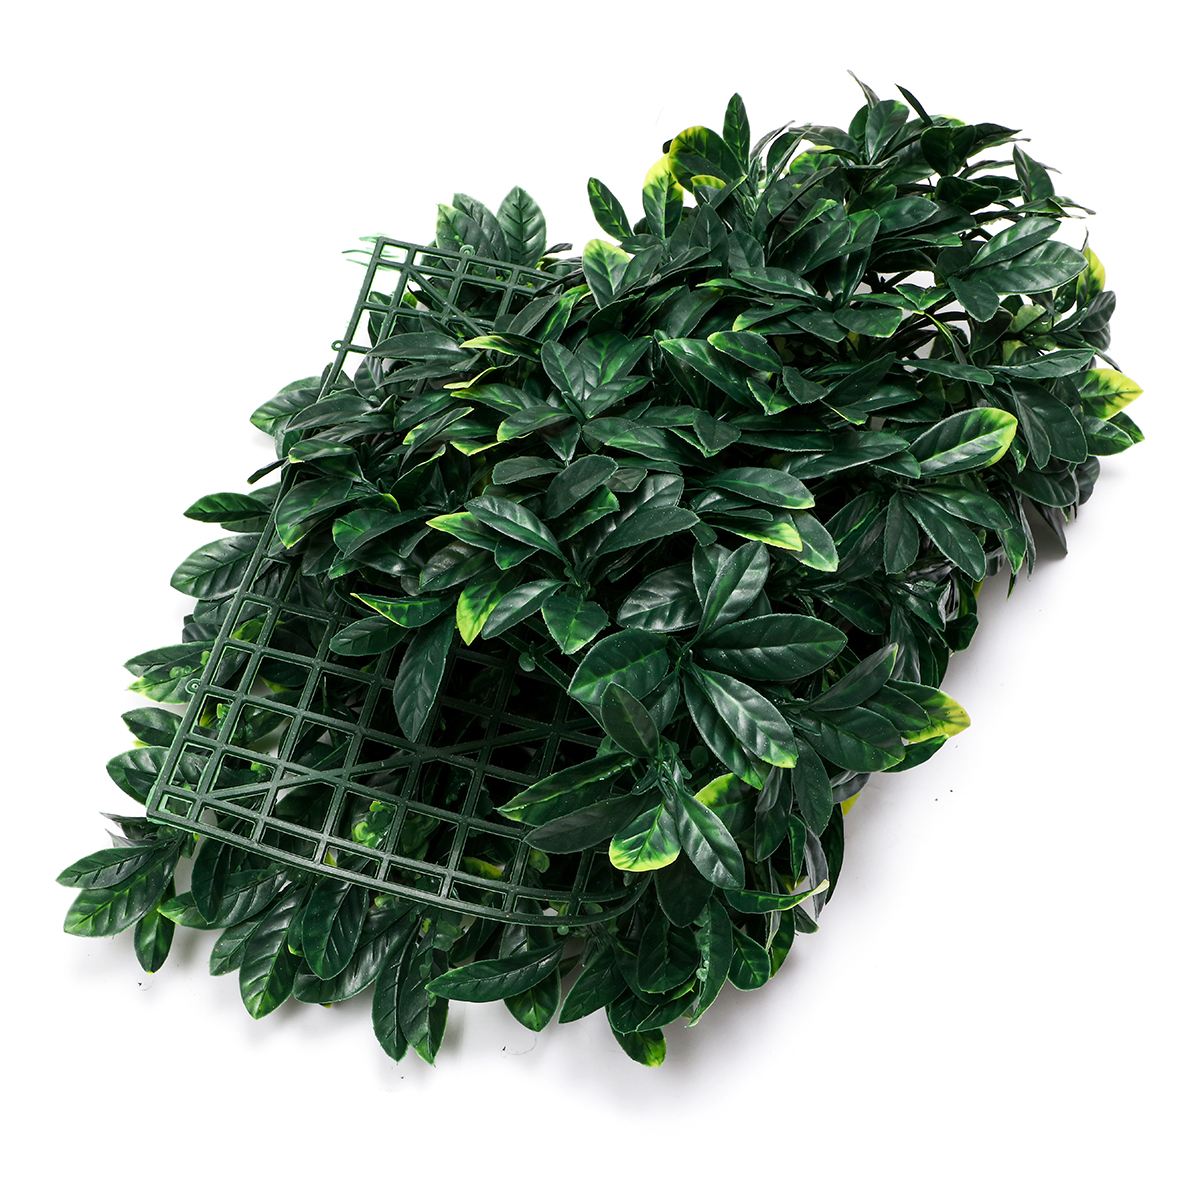 4060CM-Artificial-Topiary-Hedges-Panels-Plastic-Faux-Shrubs-Fence-Mat-Greenery-Wall-Backdrop-Decor-G-1729461-27